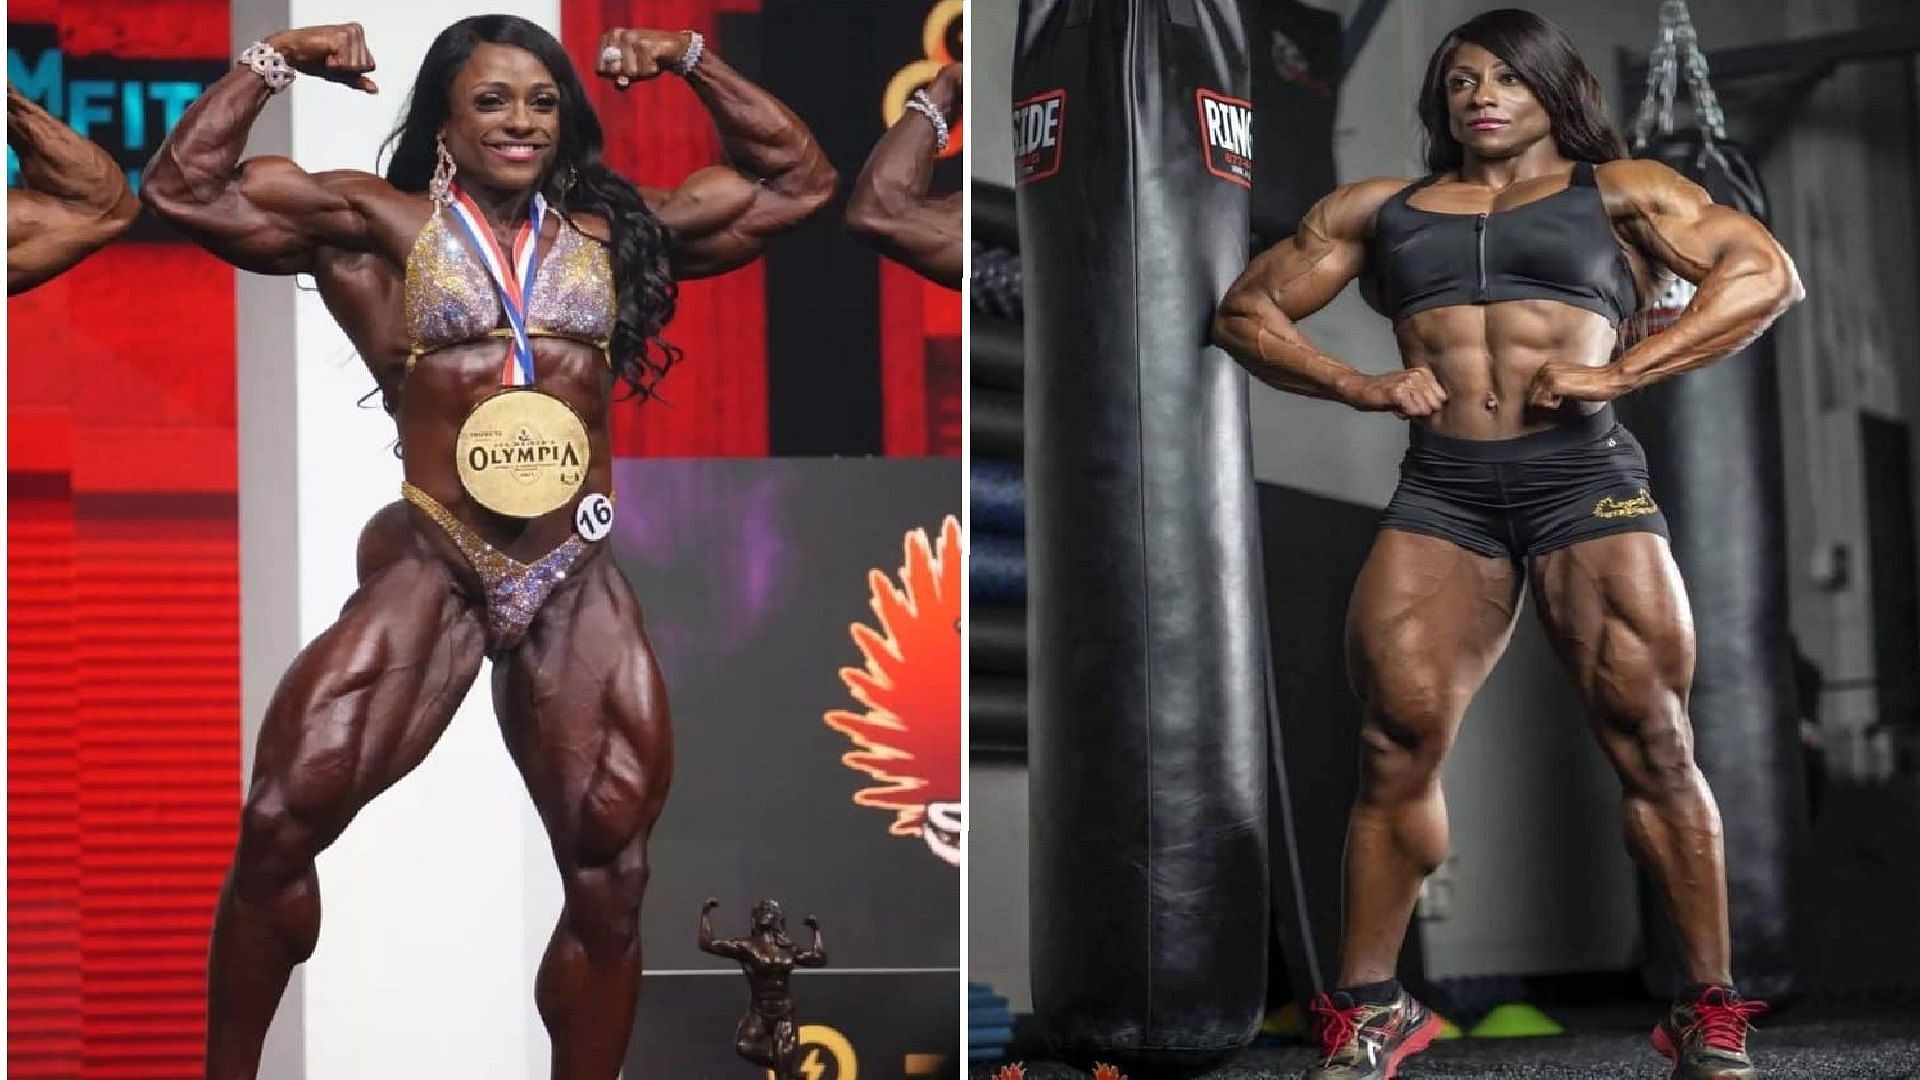 3-times Ms. Olympia Andrea Shaw